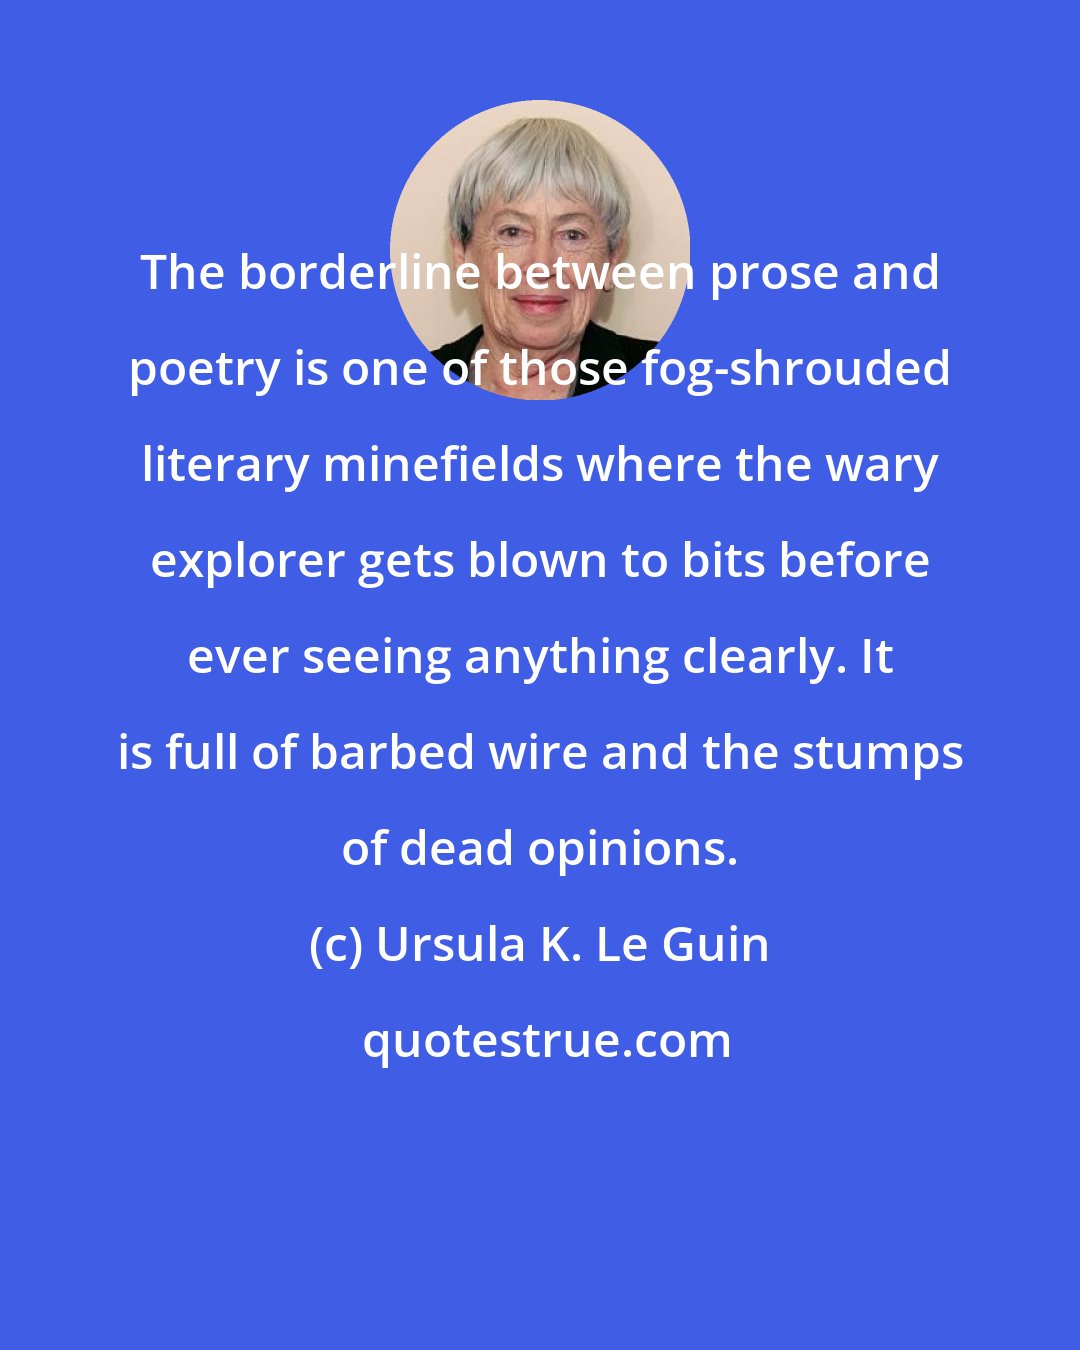 Ursula K. Le Guin: The borderline between prose and poetry is one of those fog-shrouded literary minefields where the wary explorer gets blown to bits before ever seeing anything clearly. It is full of barbed wire and the stumps of dead opinions.